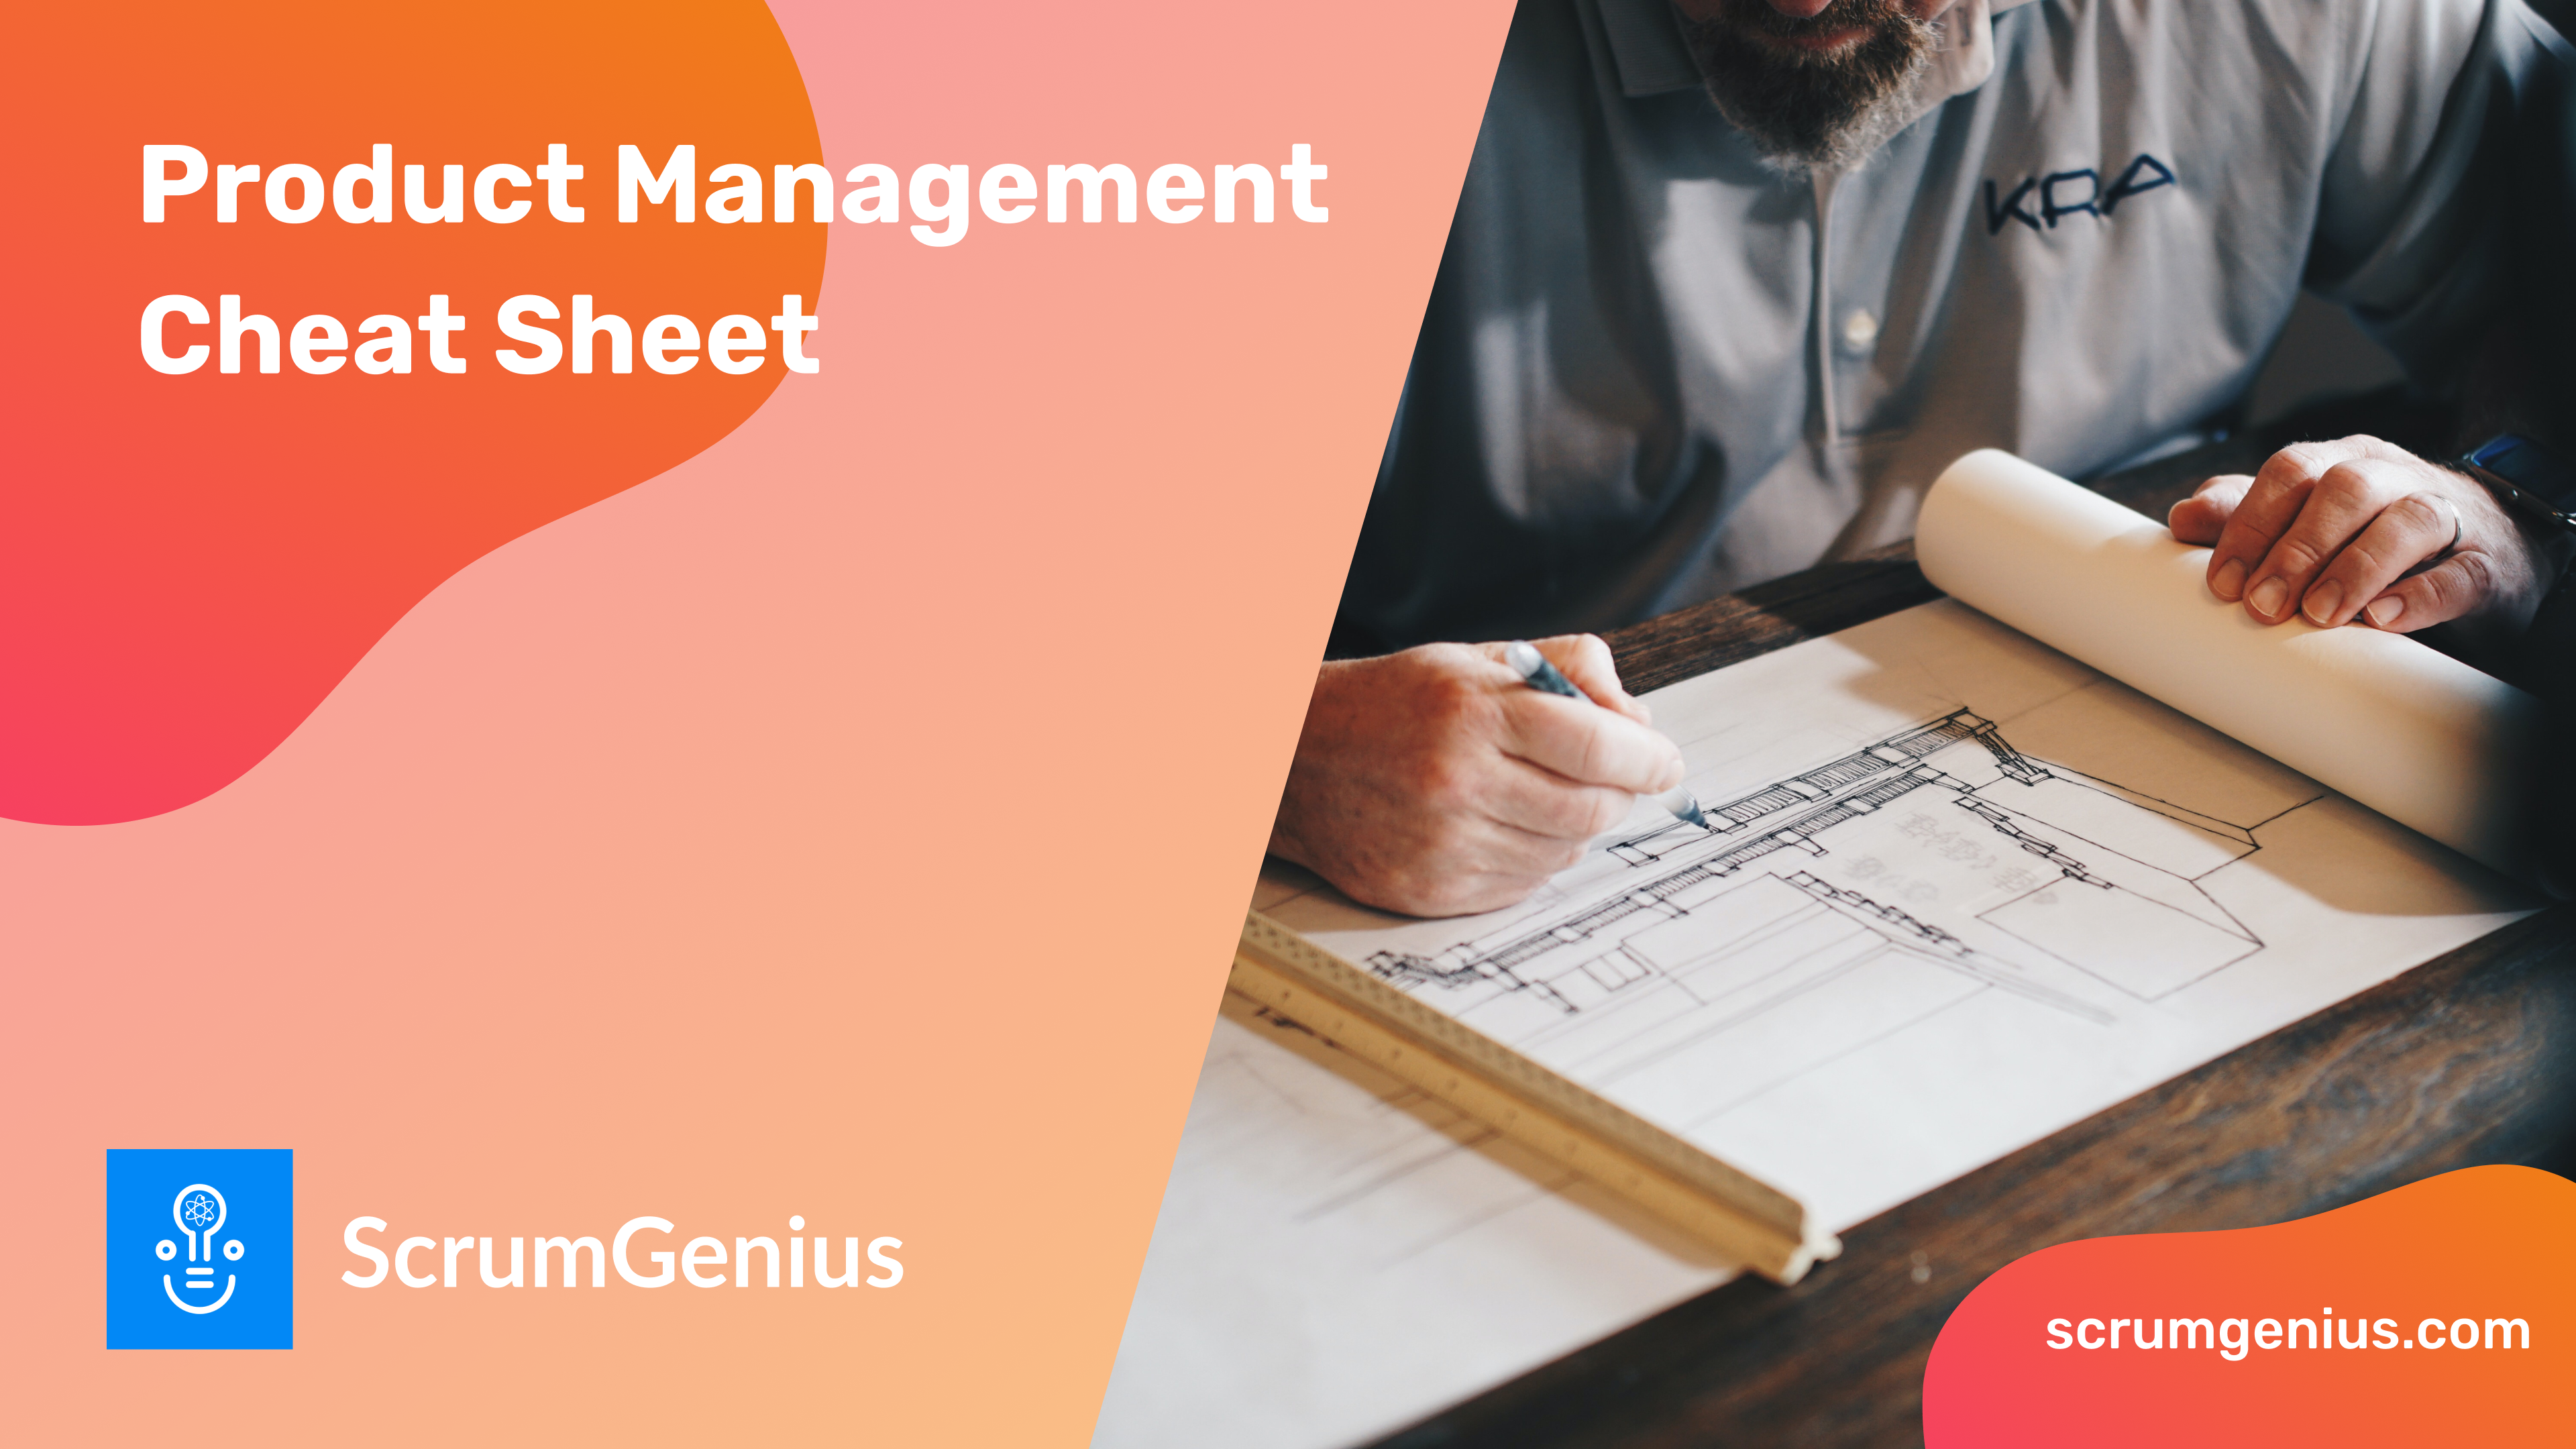 A PM's In-Depth Guide to Product Management